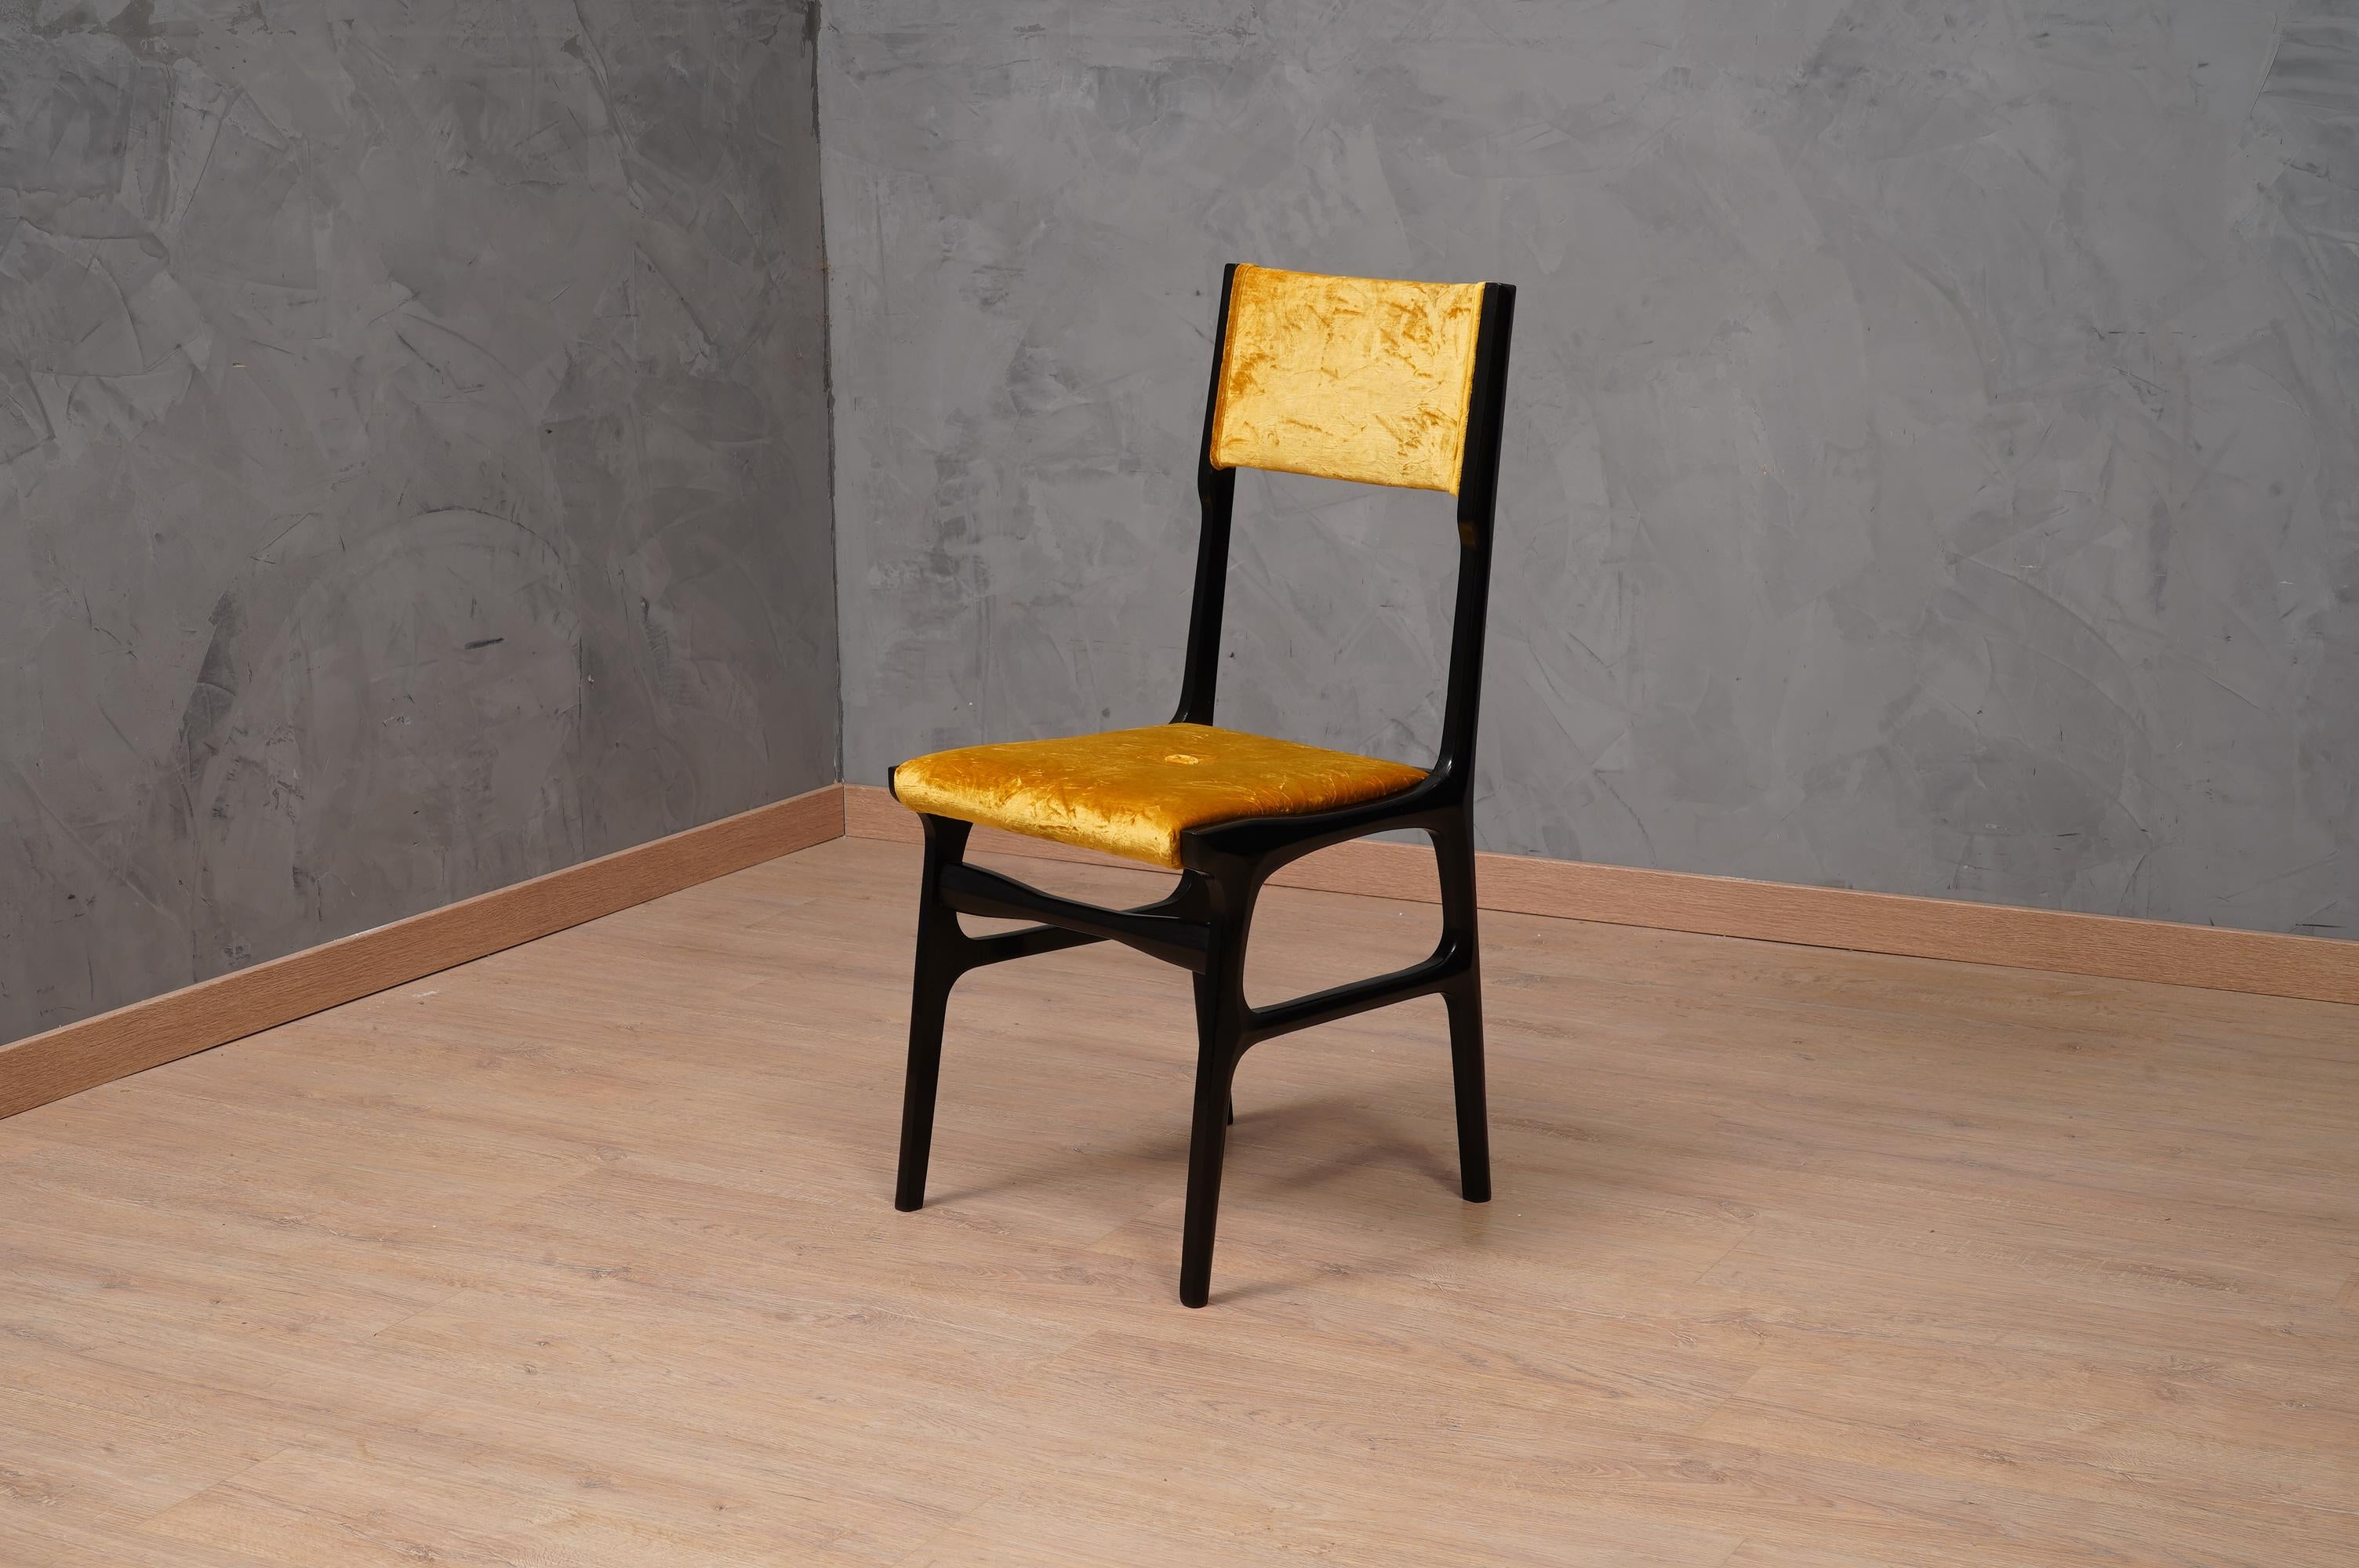 Six chairs attributed to Carlo de Carli 1955, recognizable by their very special design, in the rigorous style of Carlo De Carli.

All in wood polished in black shellac. The backrest and the seat have been upholstered in crumpled yellow velvet.